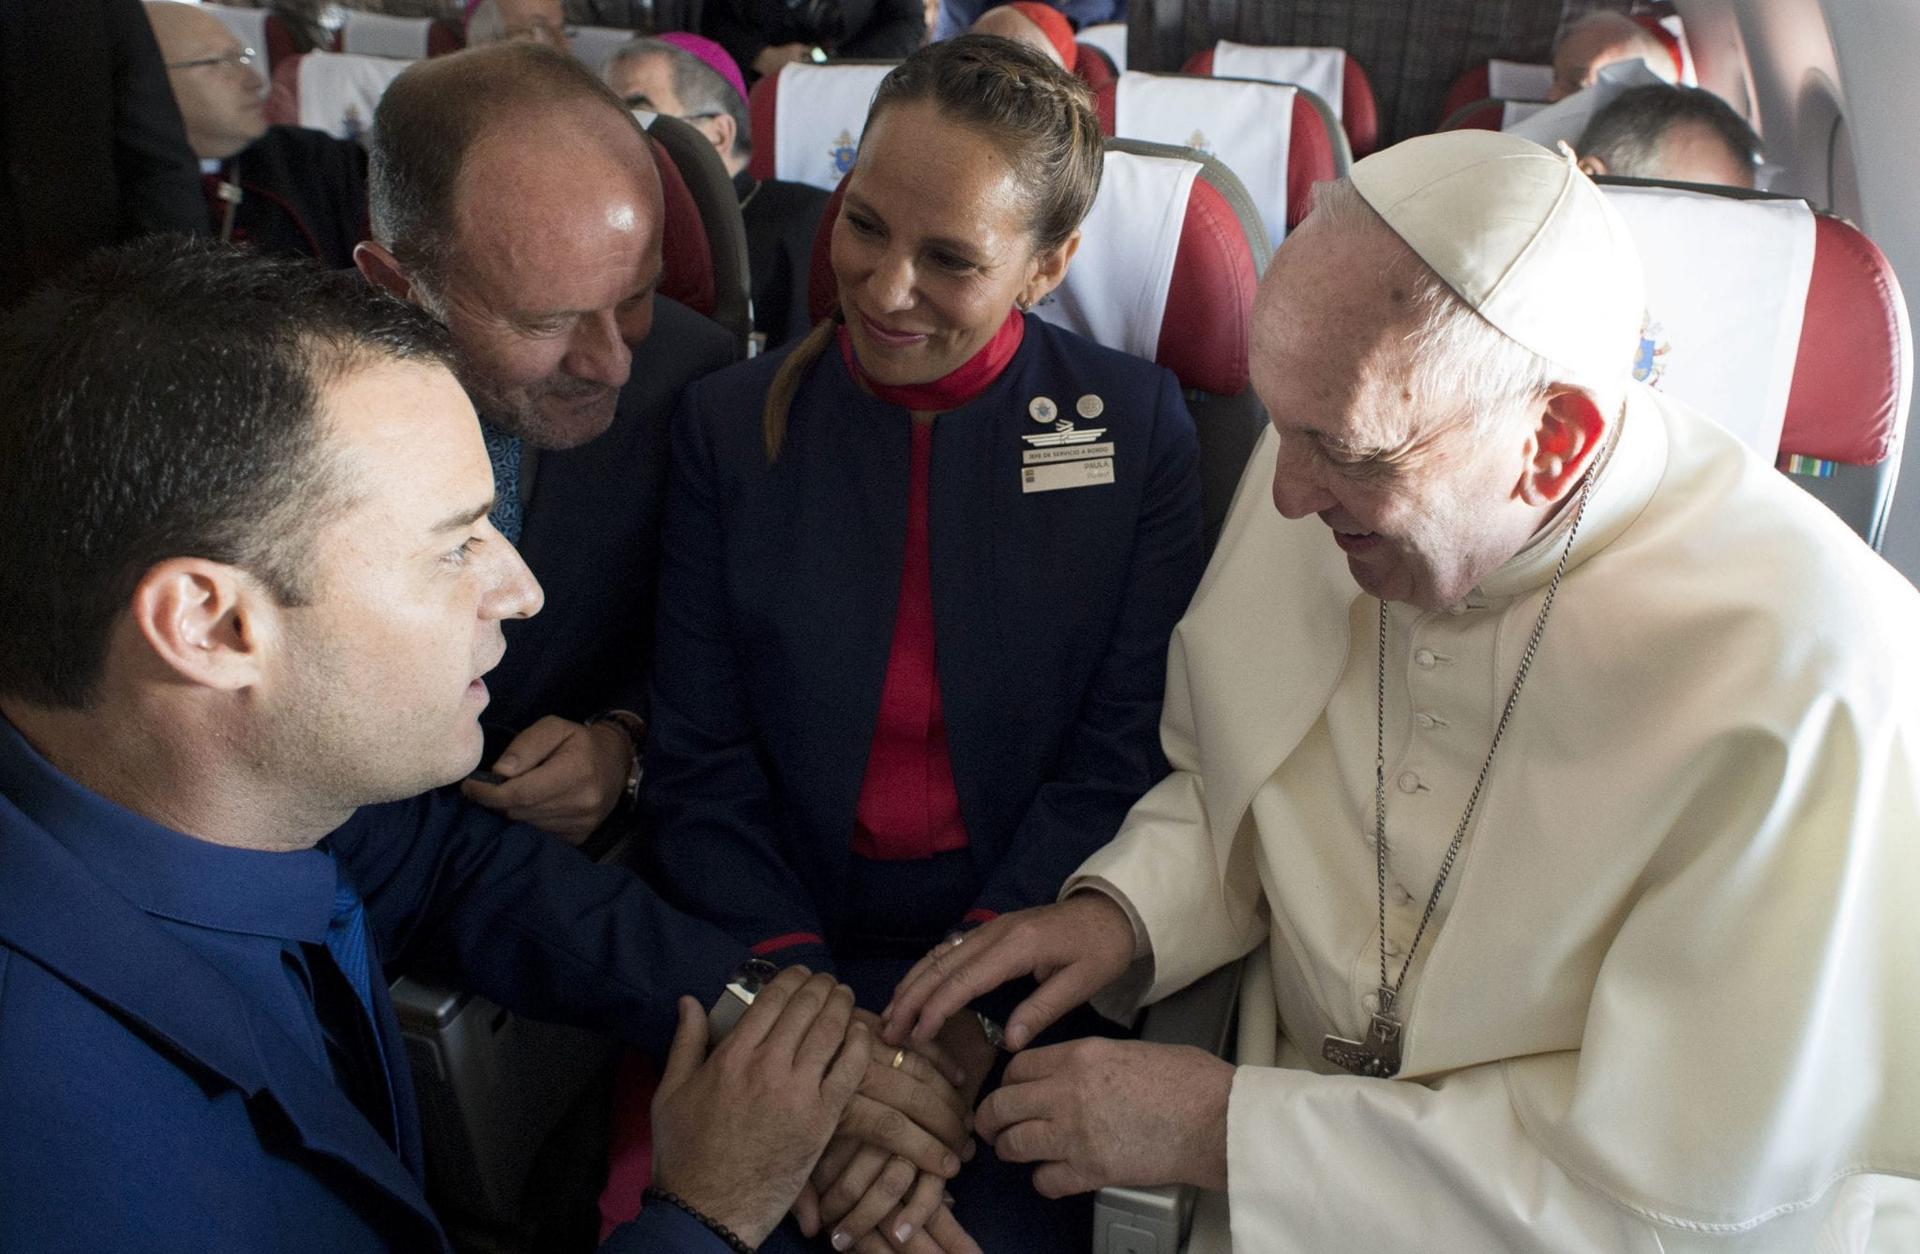 Pope defends airborne wedding, insisting the couple was ready